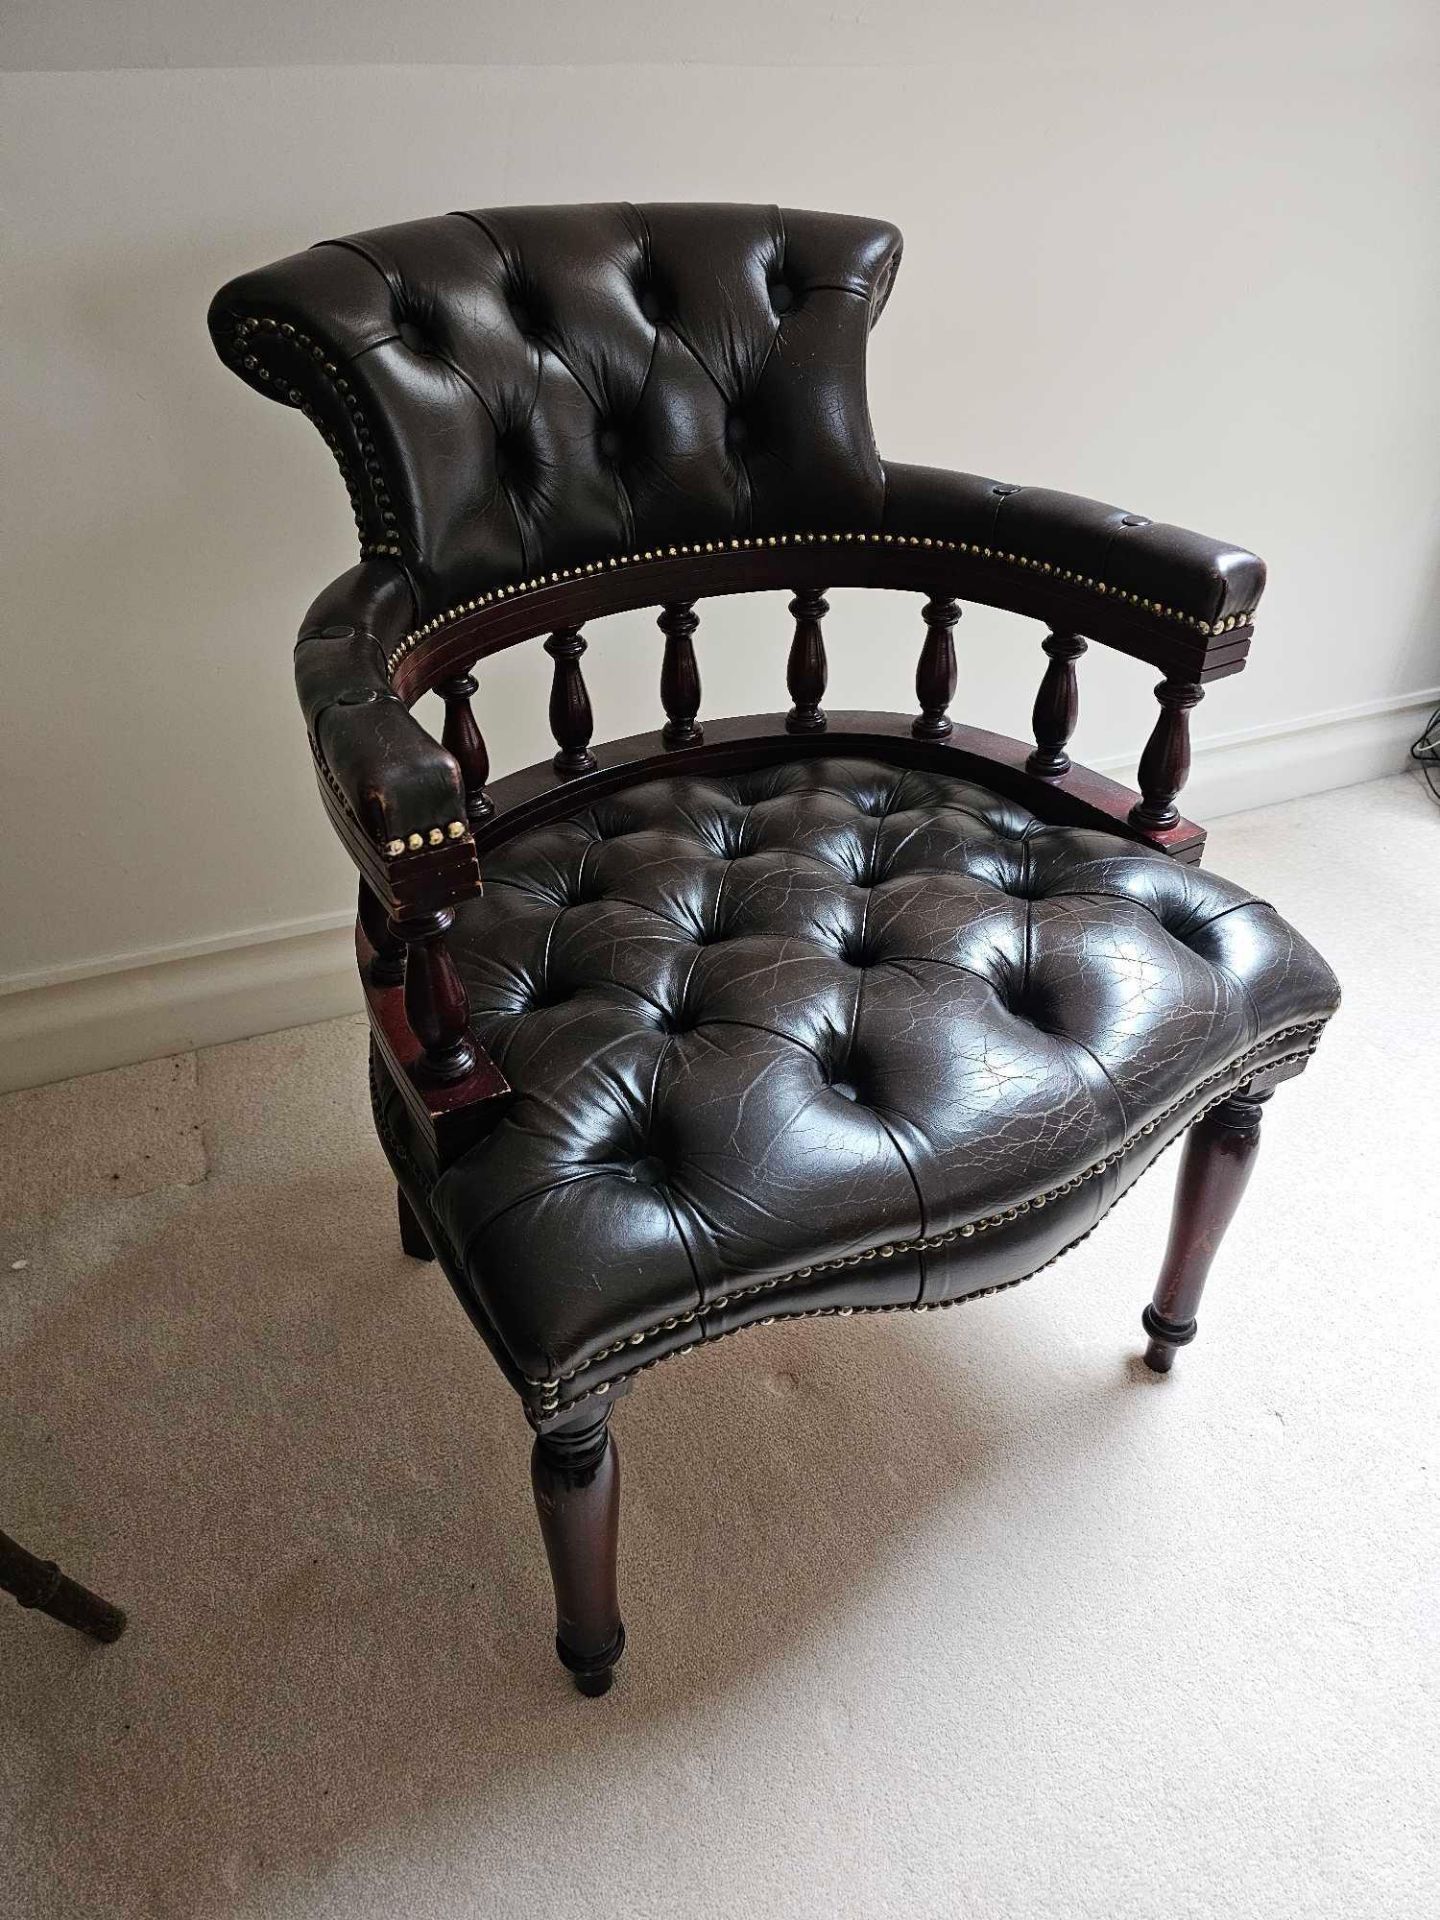 Victorian Leather Tufted Desk Chair With A Galleried Bold Turned Rails Between The Seat & The Curved - Image 2 of 4